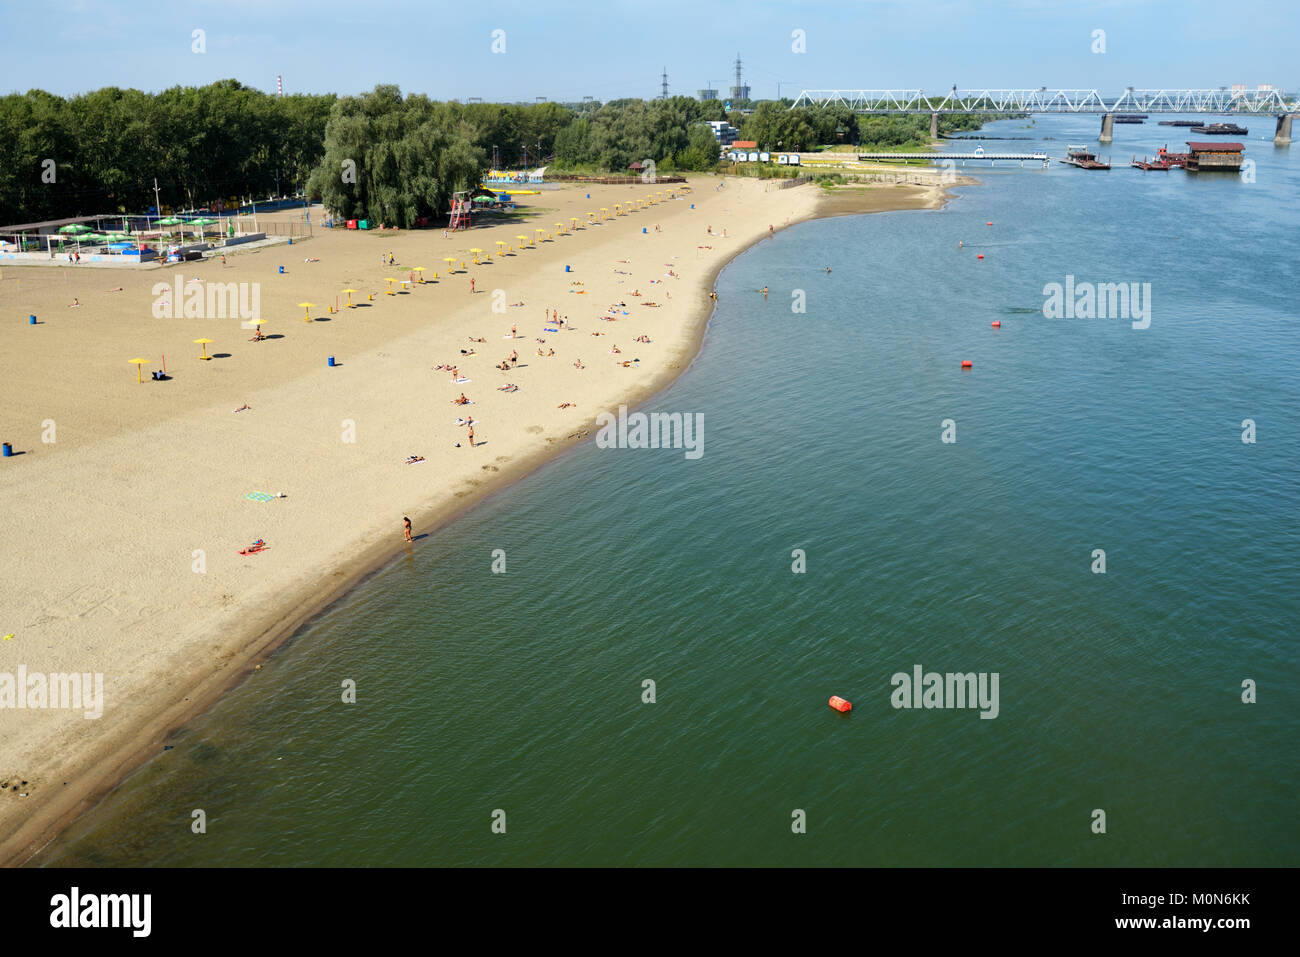 Novosibirsk, Russia - August 24, 2014: People resting on the beach Nautilus on the left bank of Ob river. It is the main city beach of Siberia's capit Stock Photo